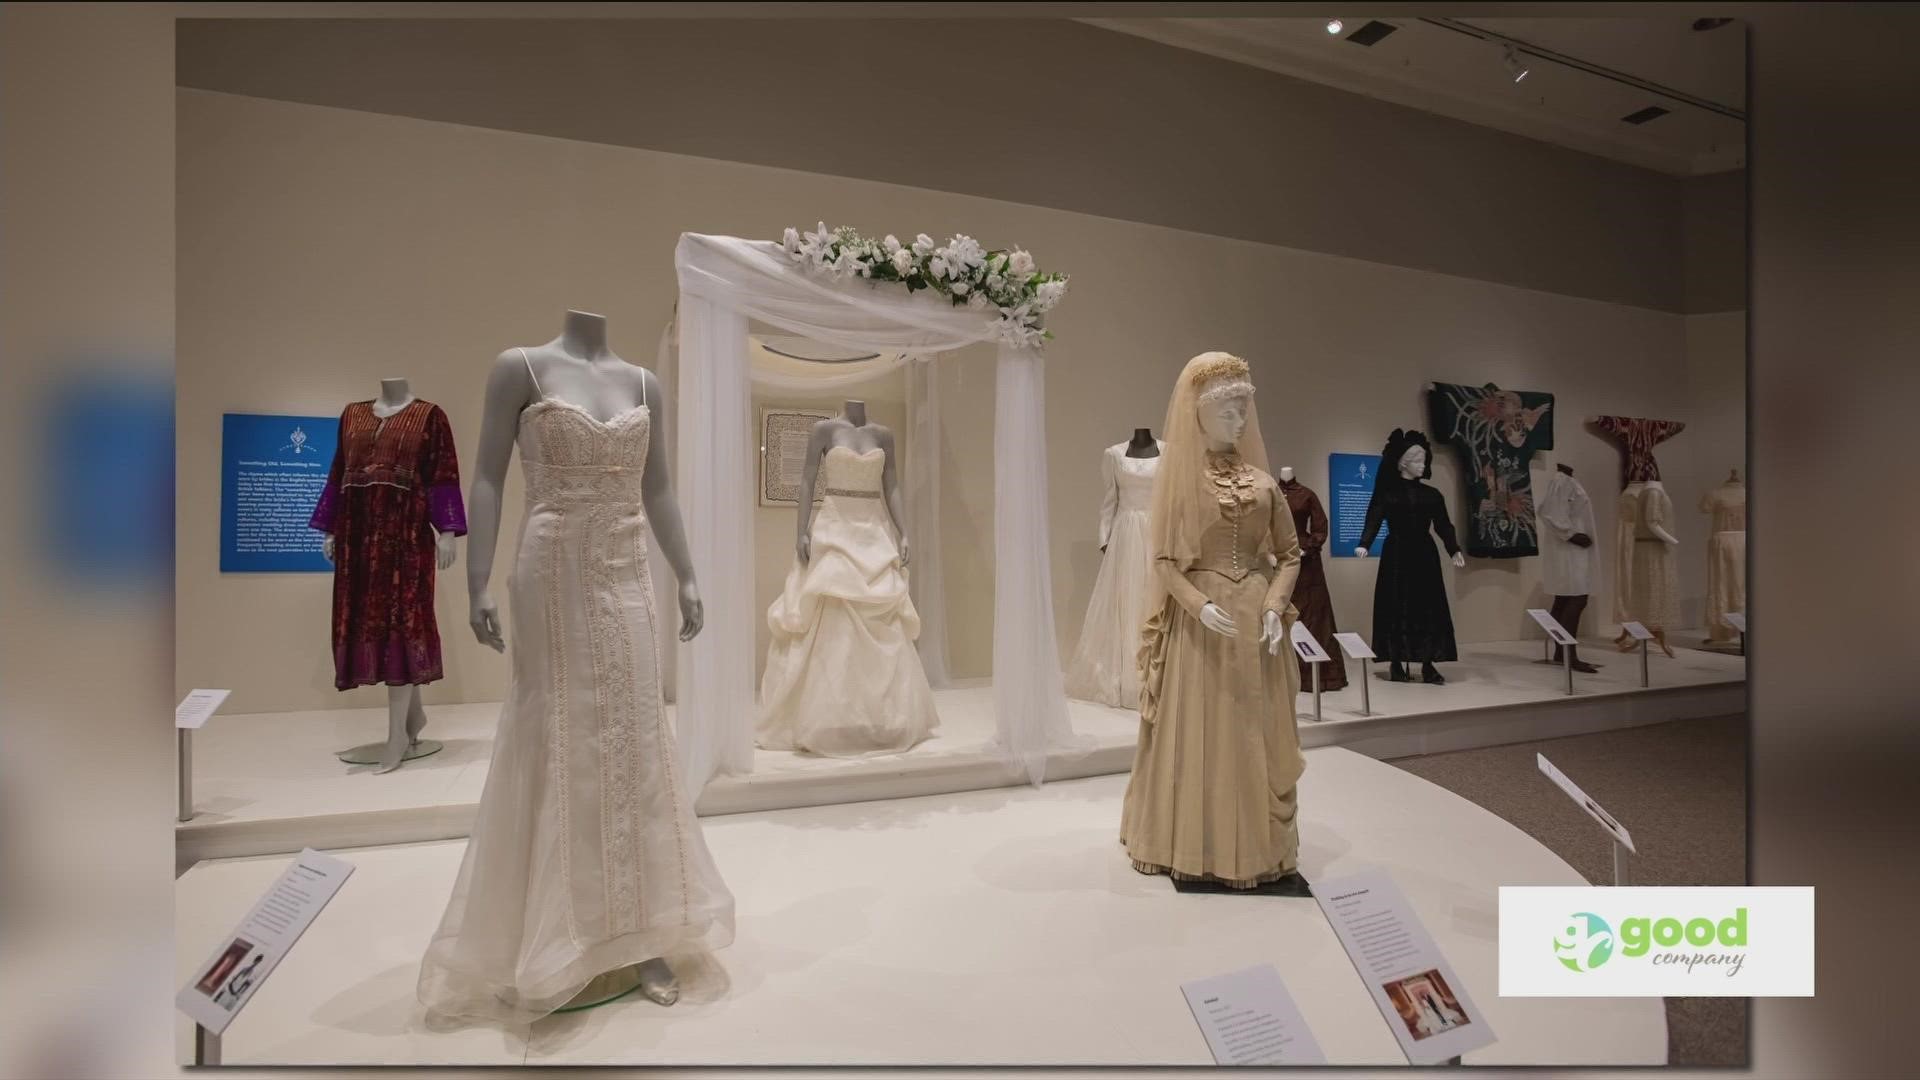 Ciarra talks with Sara Hume, PhD, about KEnt State University's new exhibit, "As the World Weds: Global Wedding Traditions."